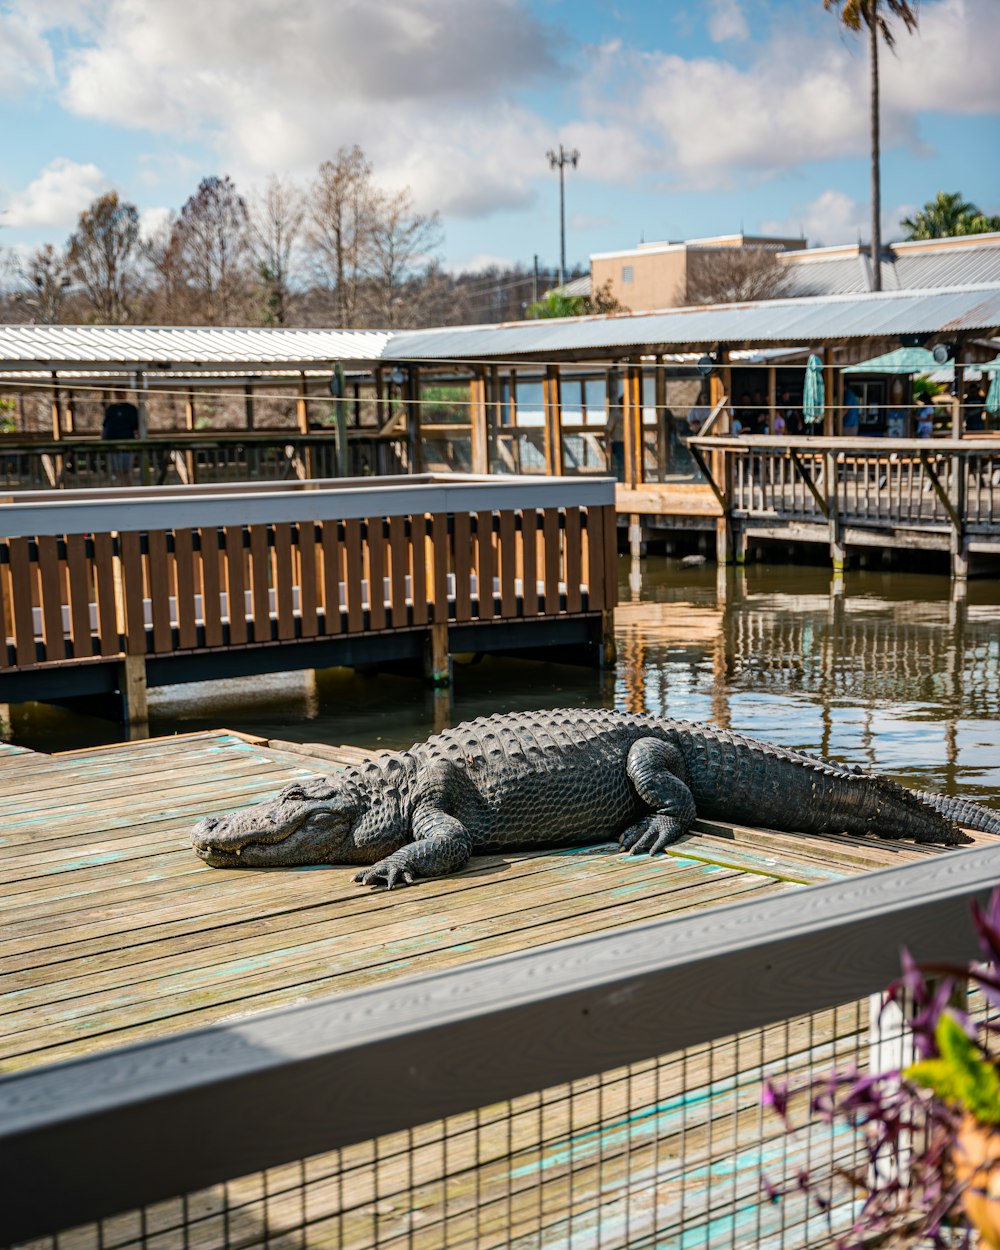 a large alligator laying on a wooden dock